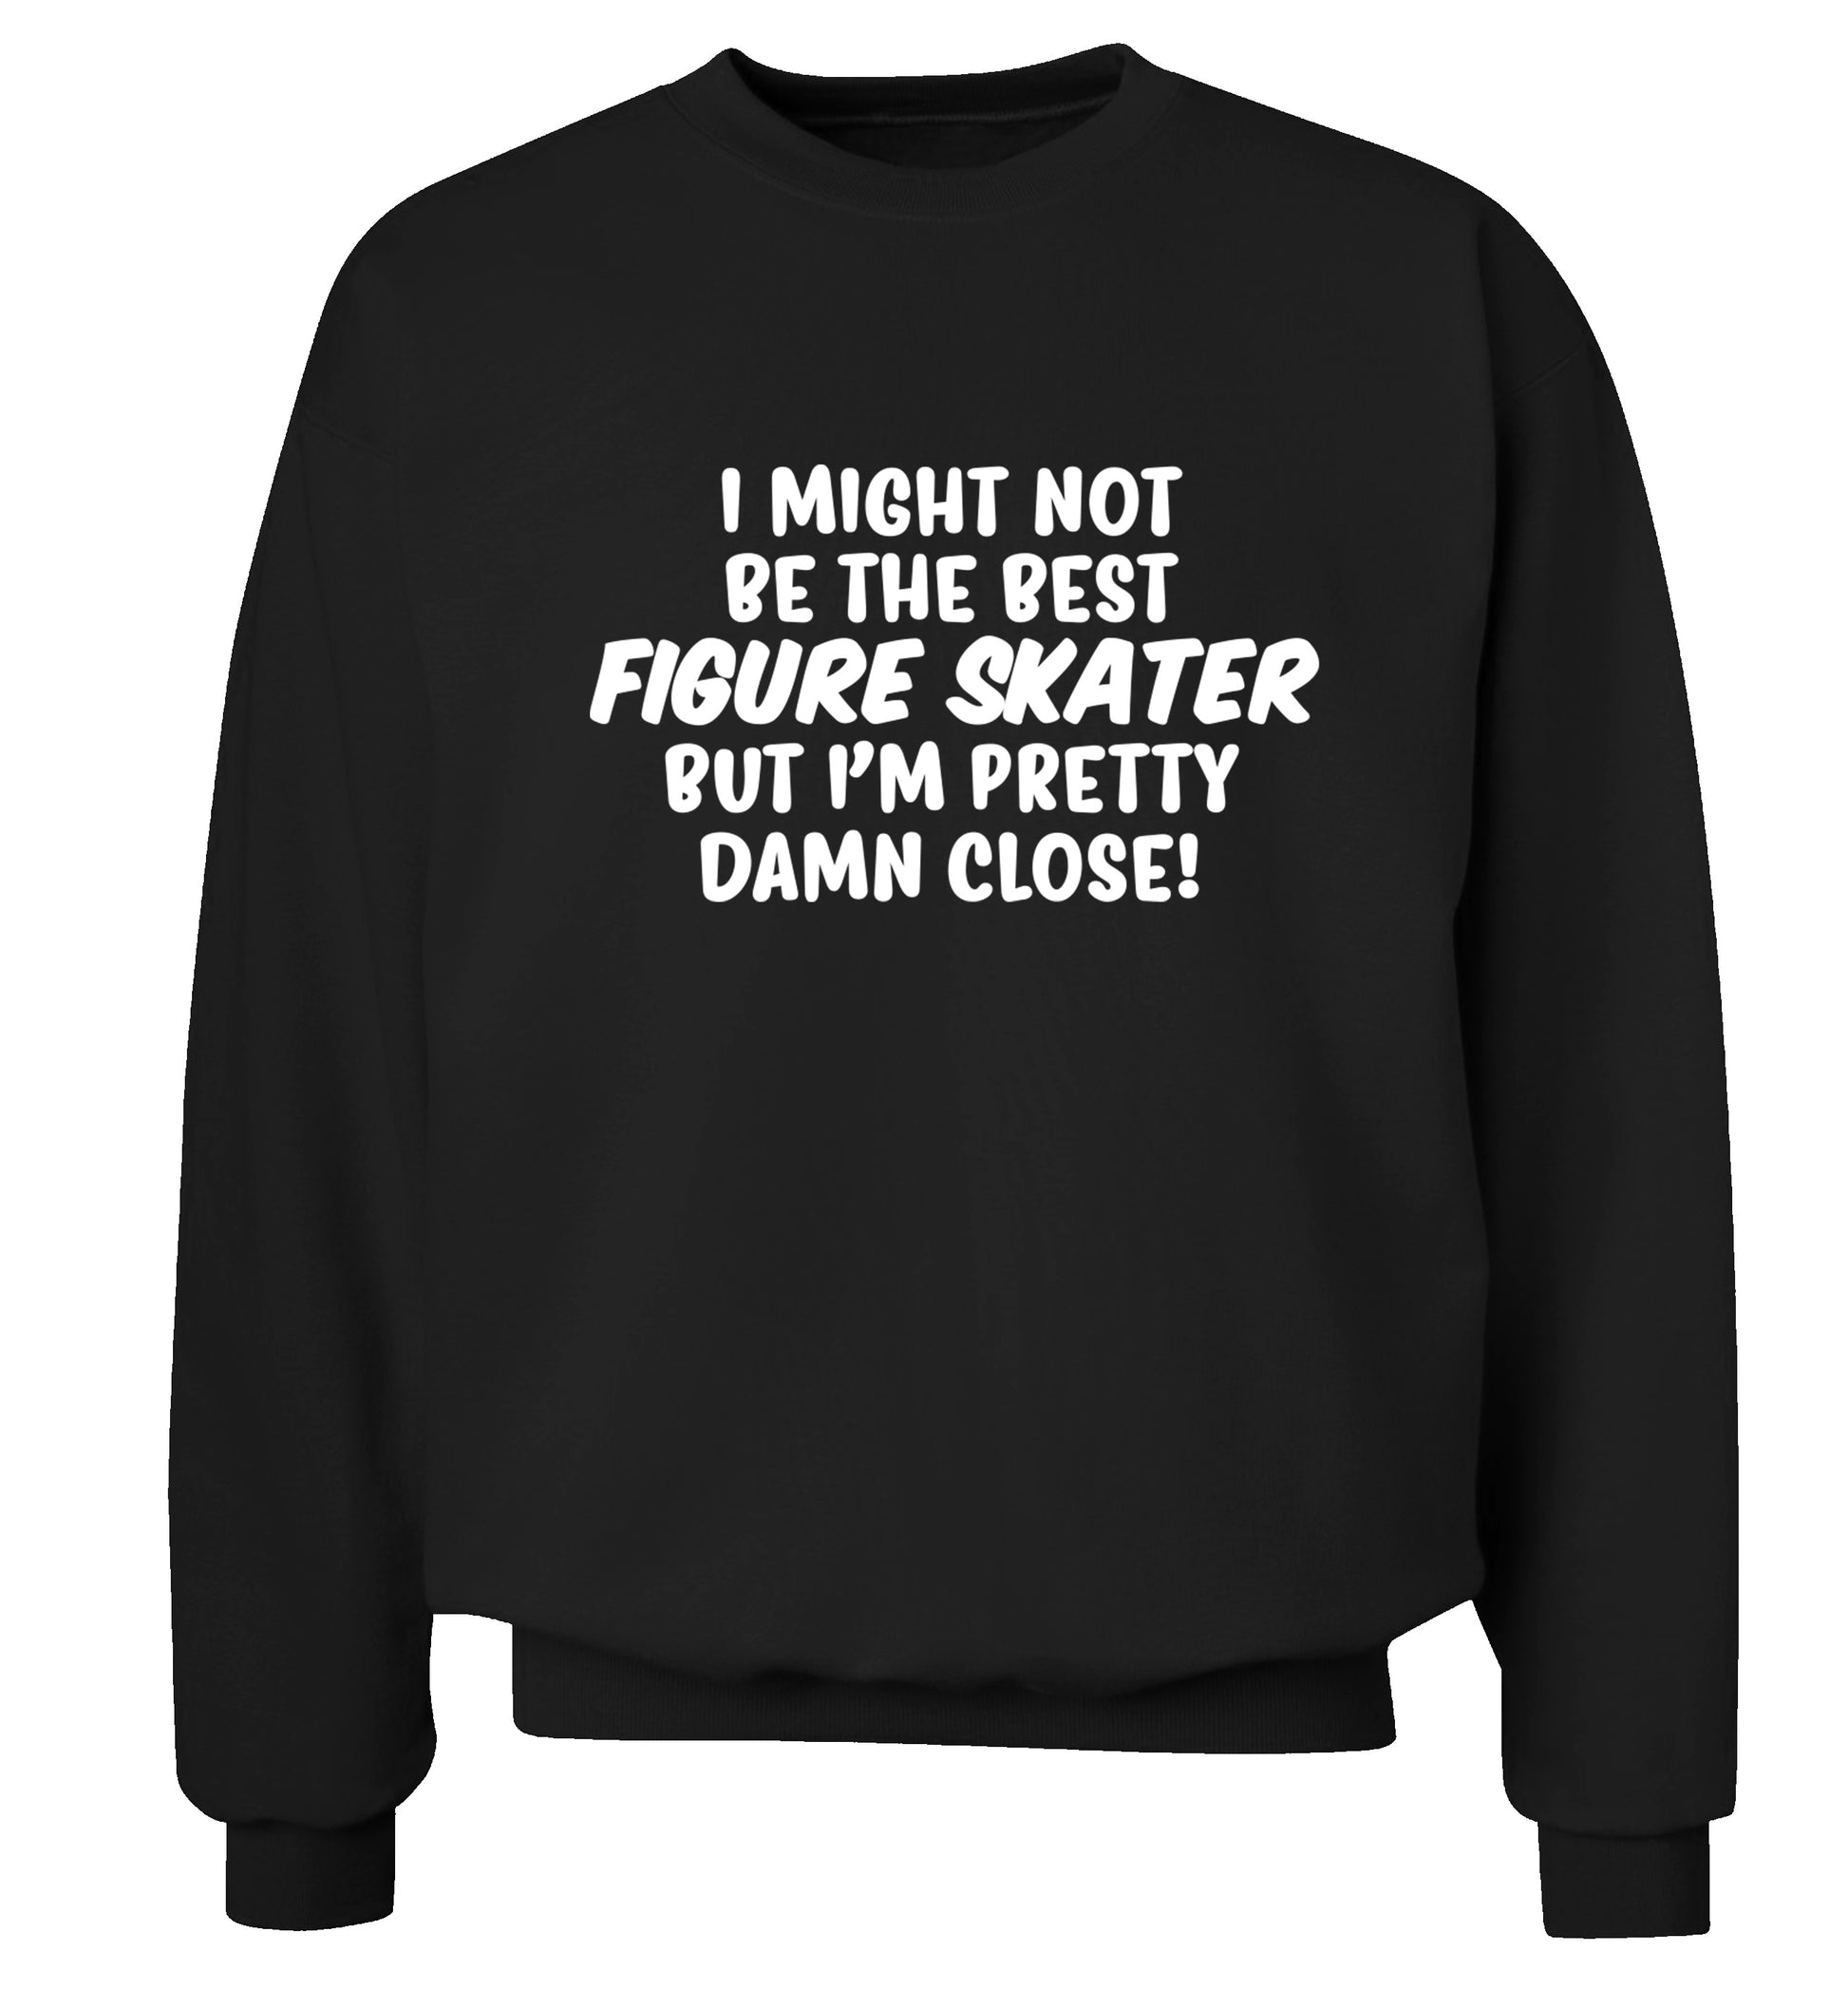 I might not be the best figure skater but I'm pretty damn close! Adult's unisexblack Sweater 2XL